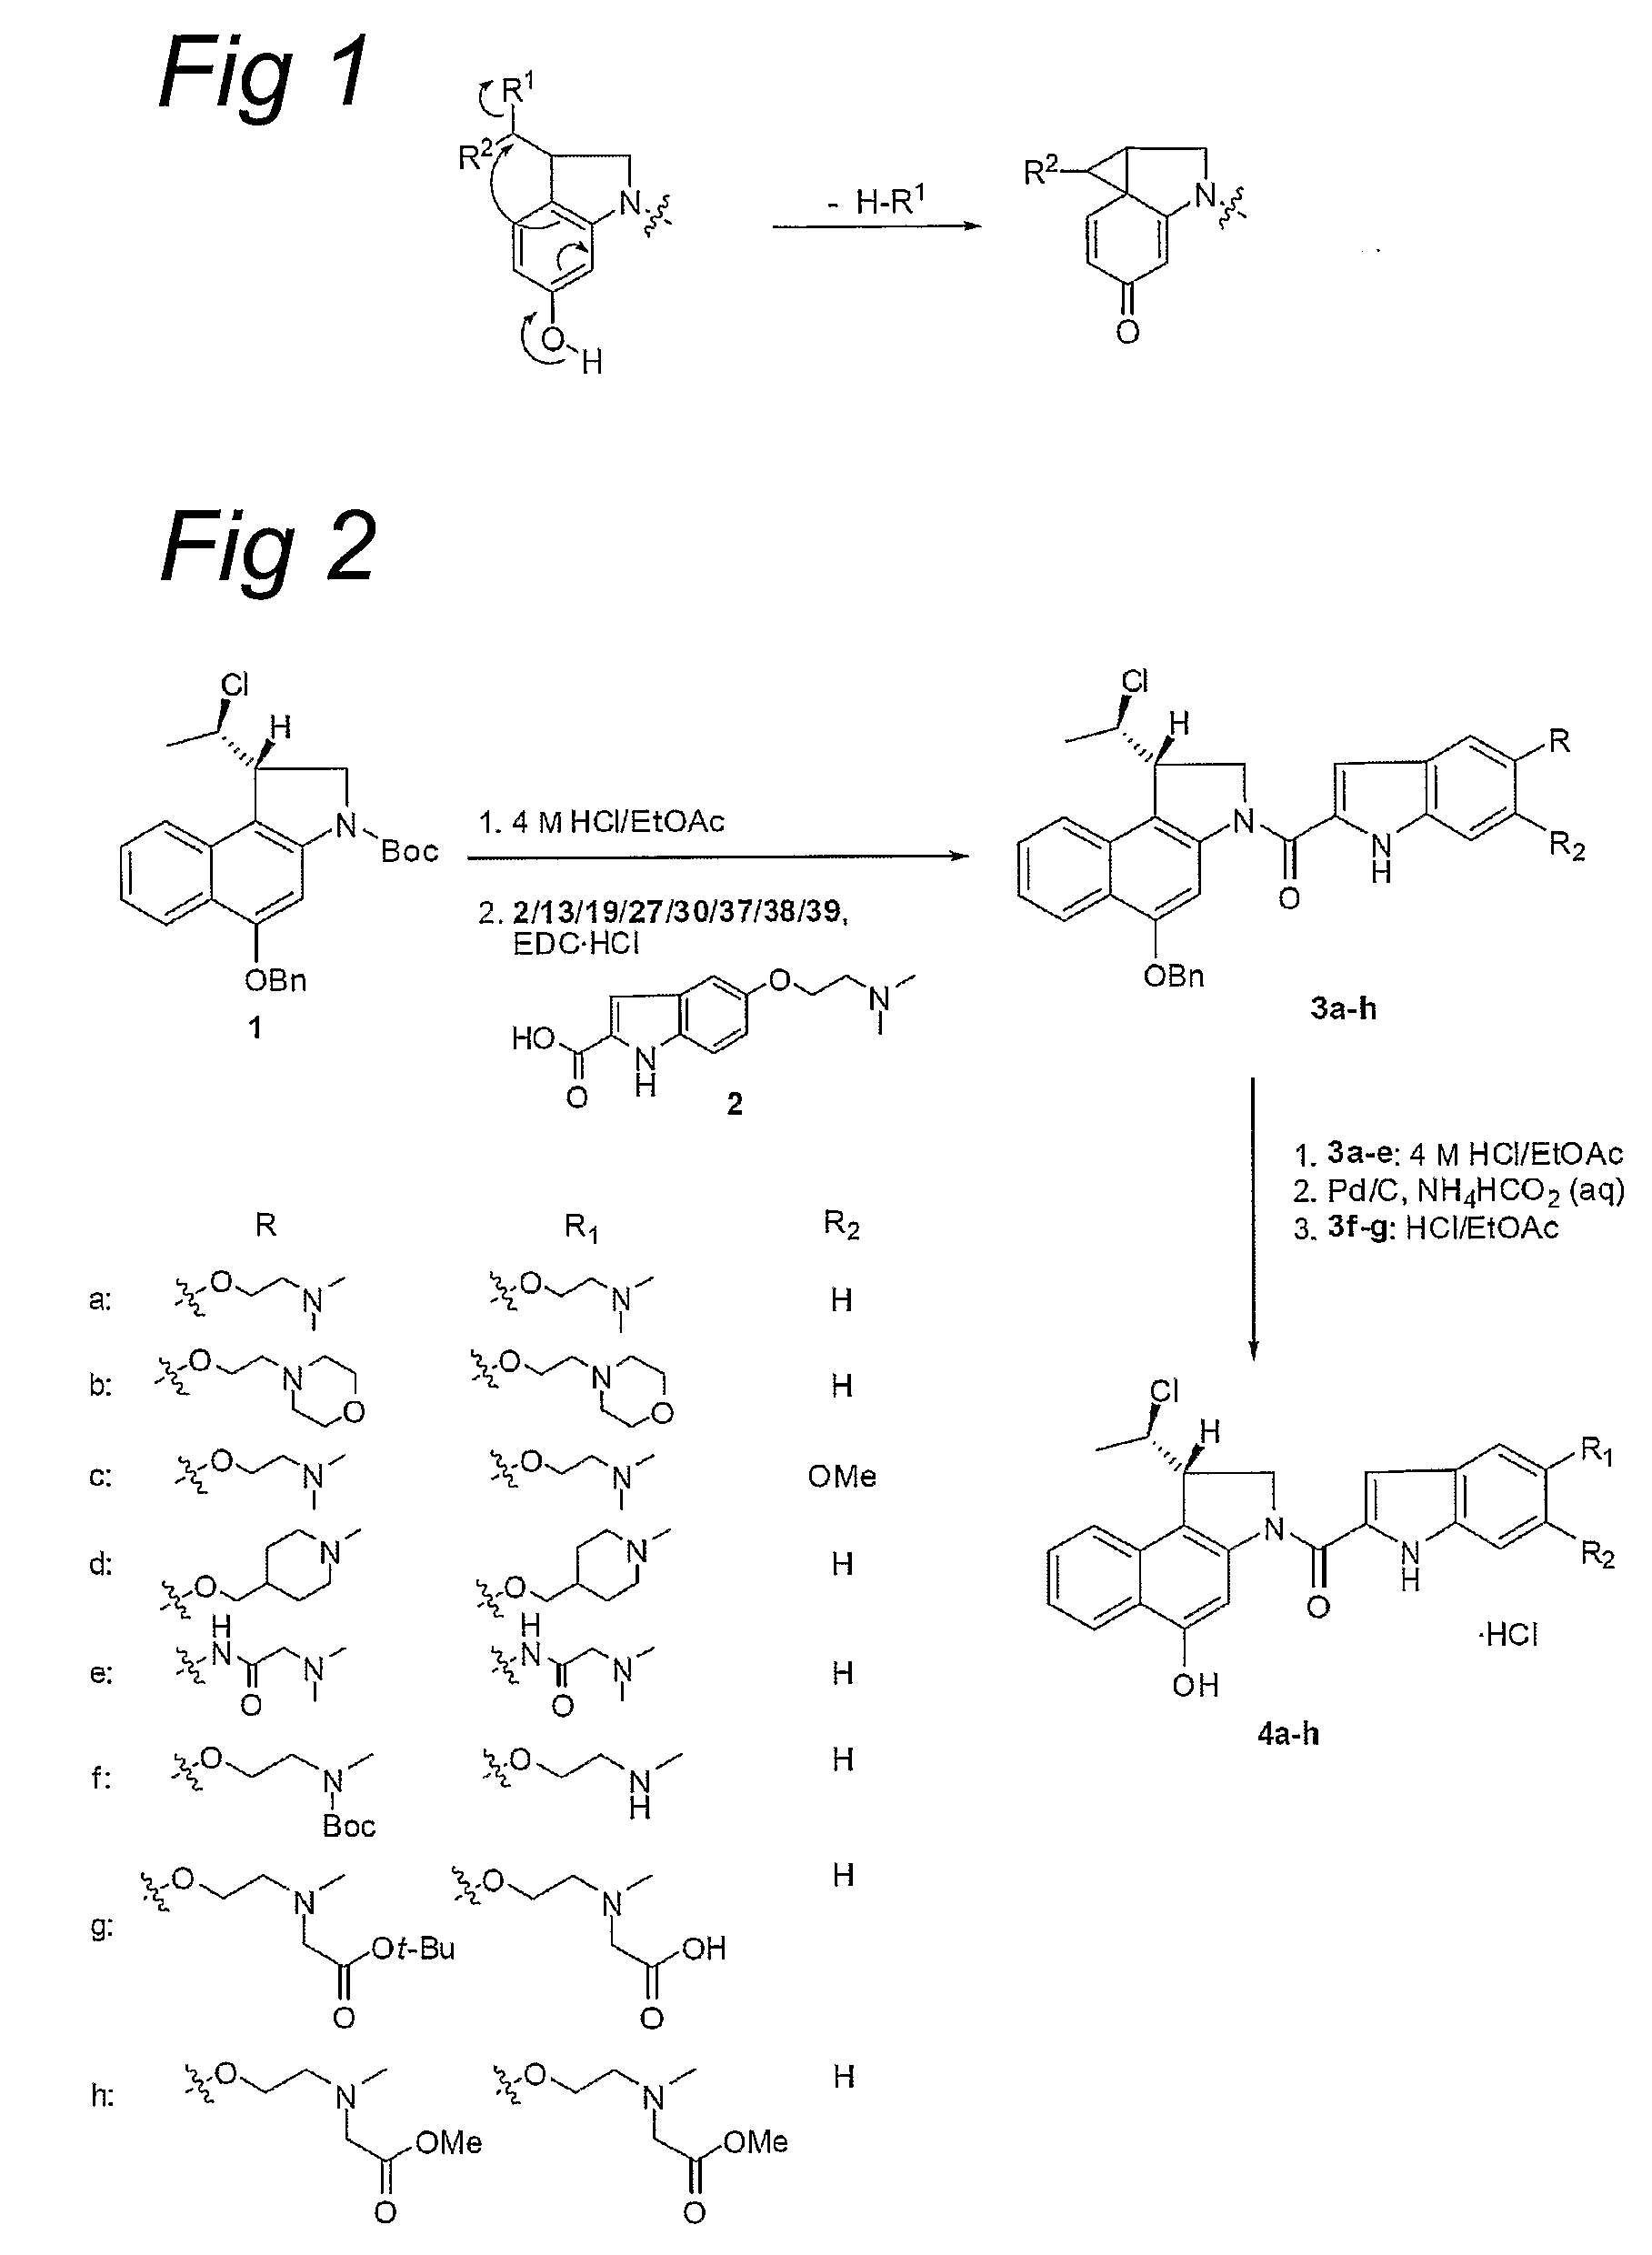 Water-Soluble CC-1065 Analogs and Their Conjugates